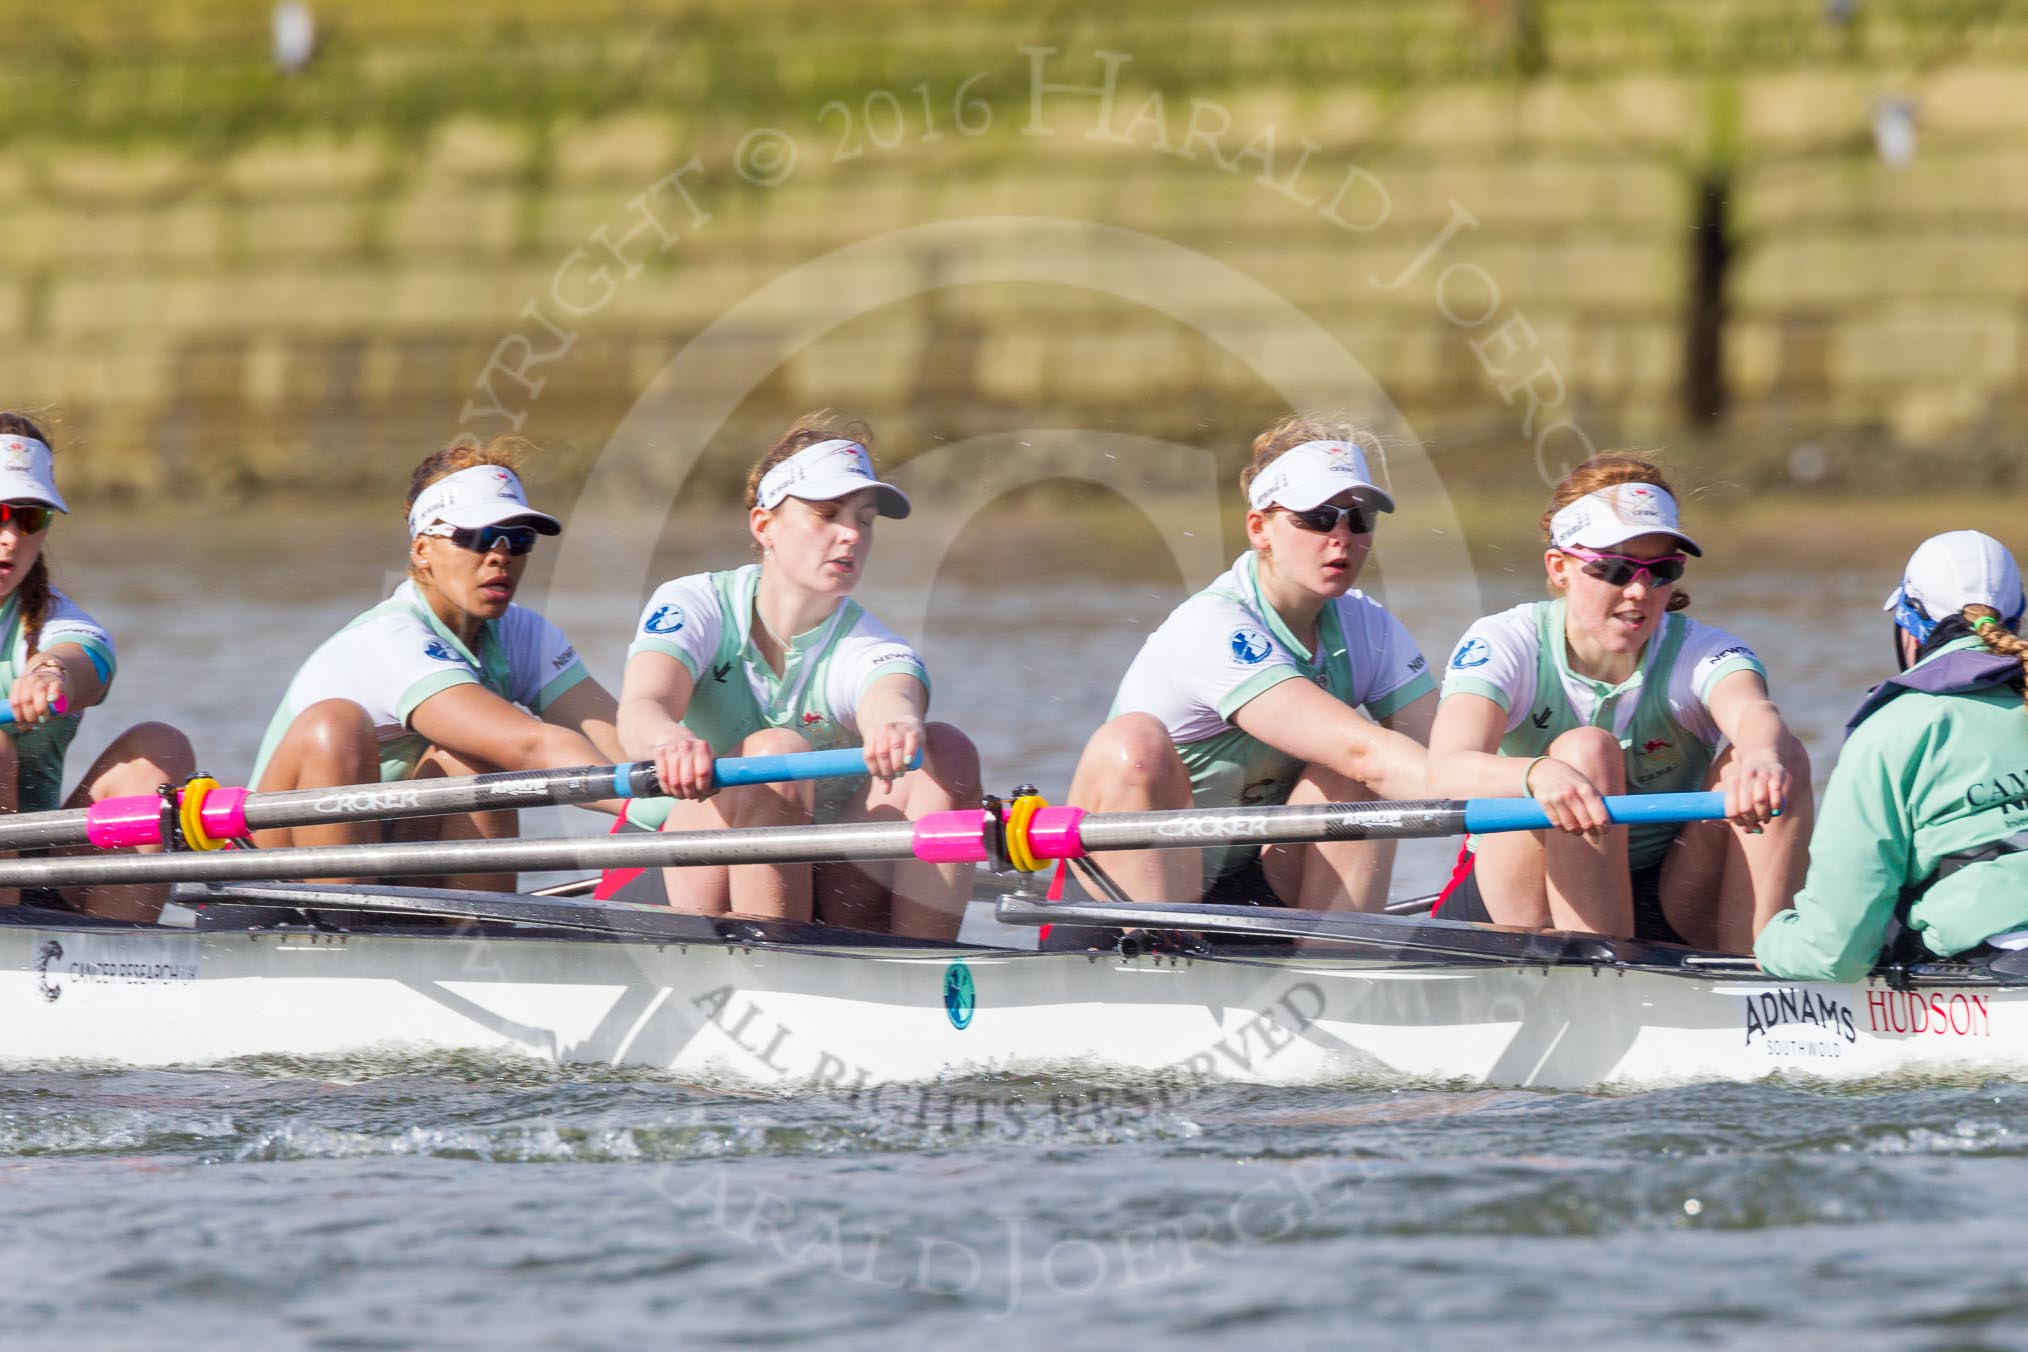 The Boat Race season 2016 -  The Cancer Research Women's Boat Race.
River Thames between Putney Bridge and Mortlake,
London SW15,

United Kingdom,
on 27 March 2016 at 14:11, image #181